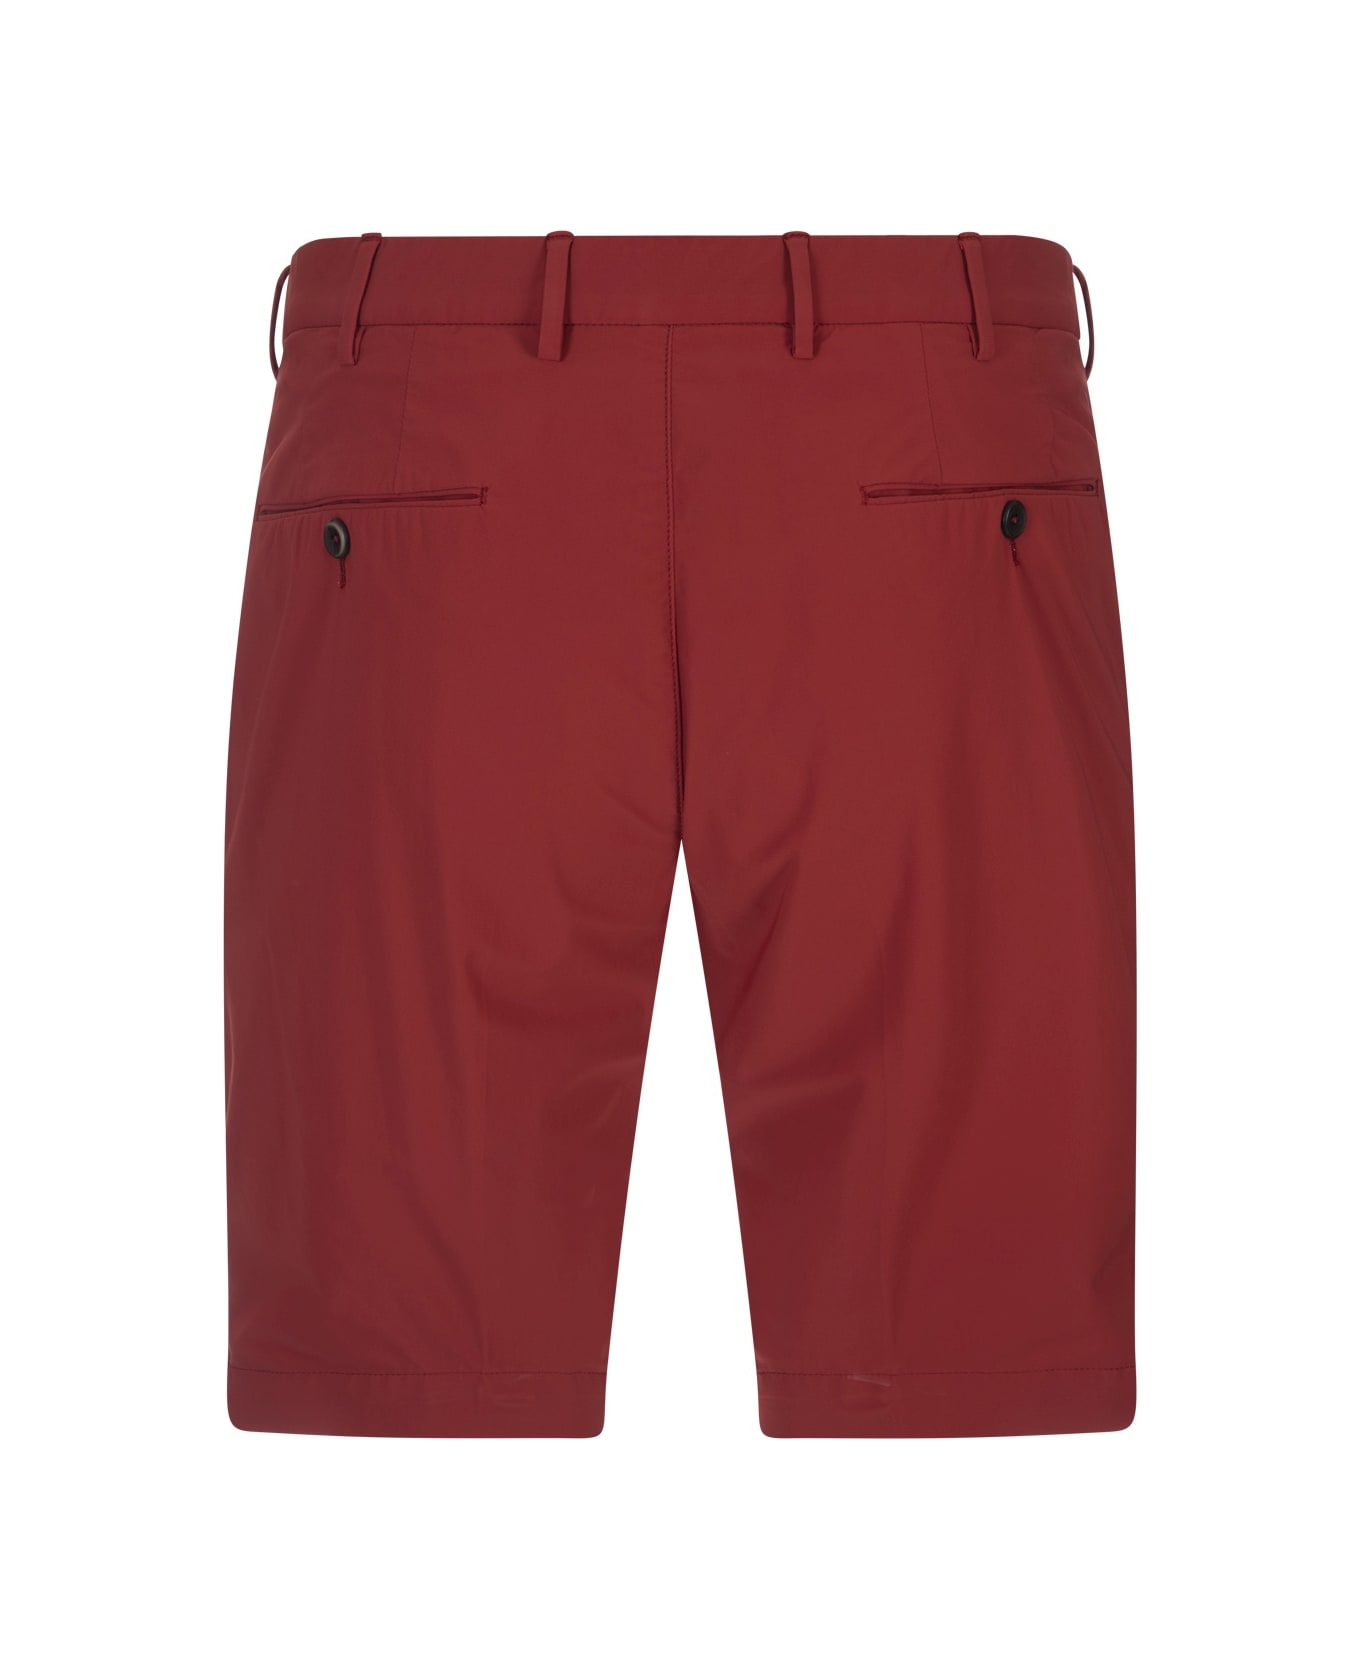 PT Torino Red Stretch Cotton Shorts - Red